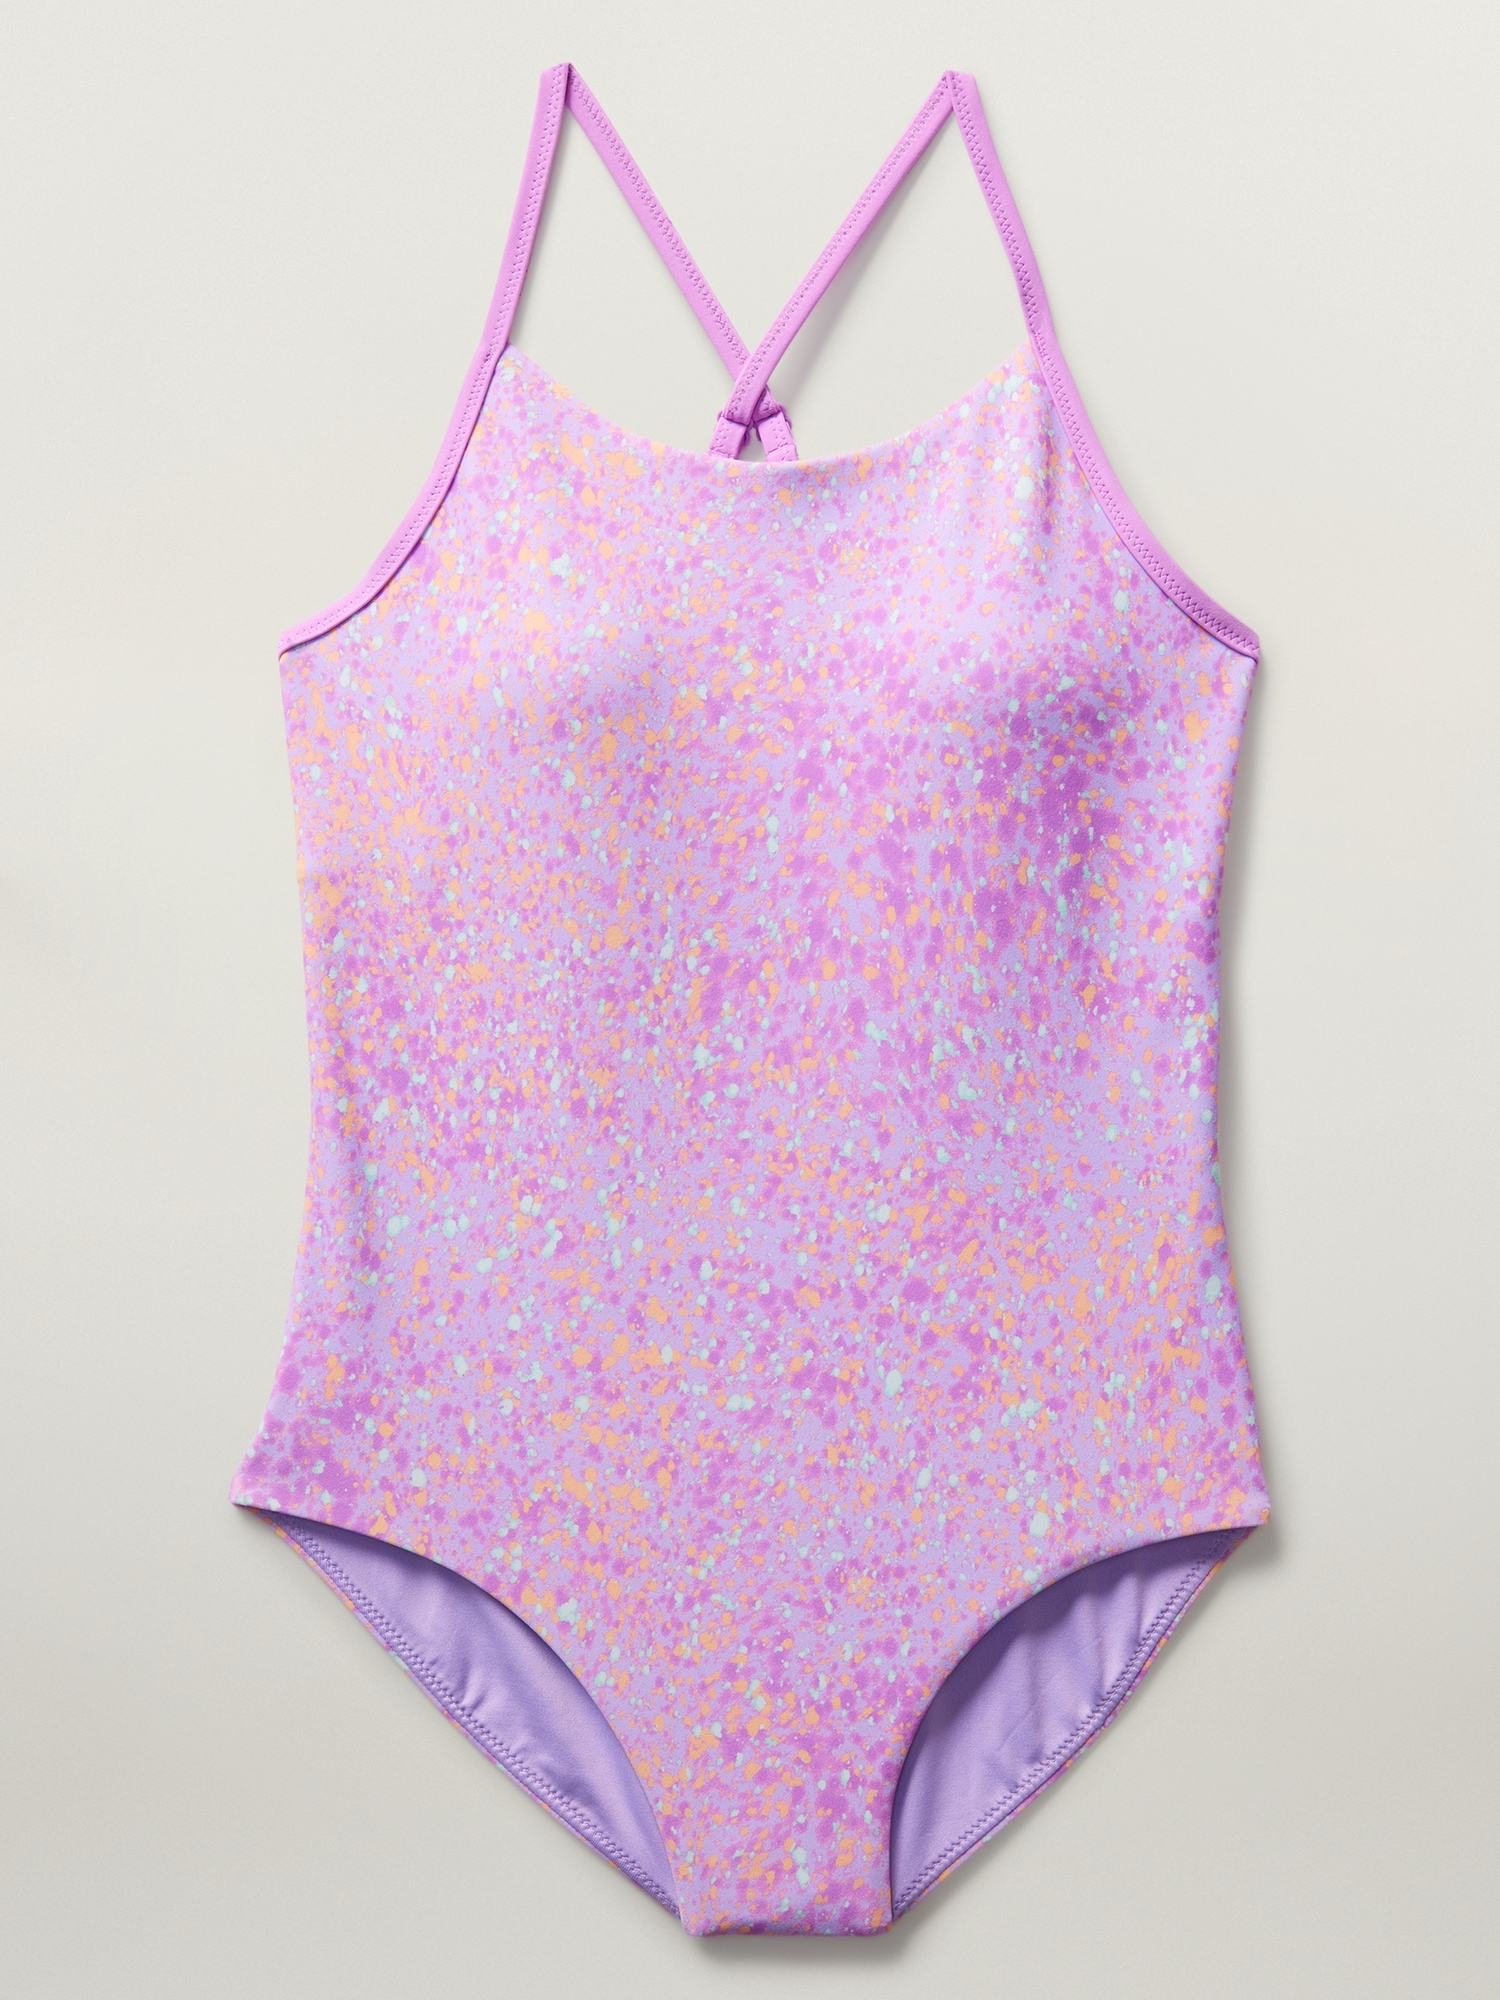 Girls One-Piece Swimsuits